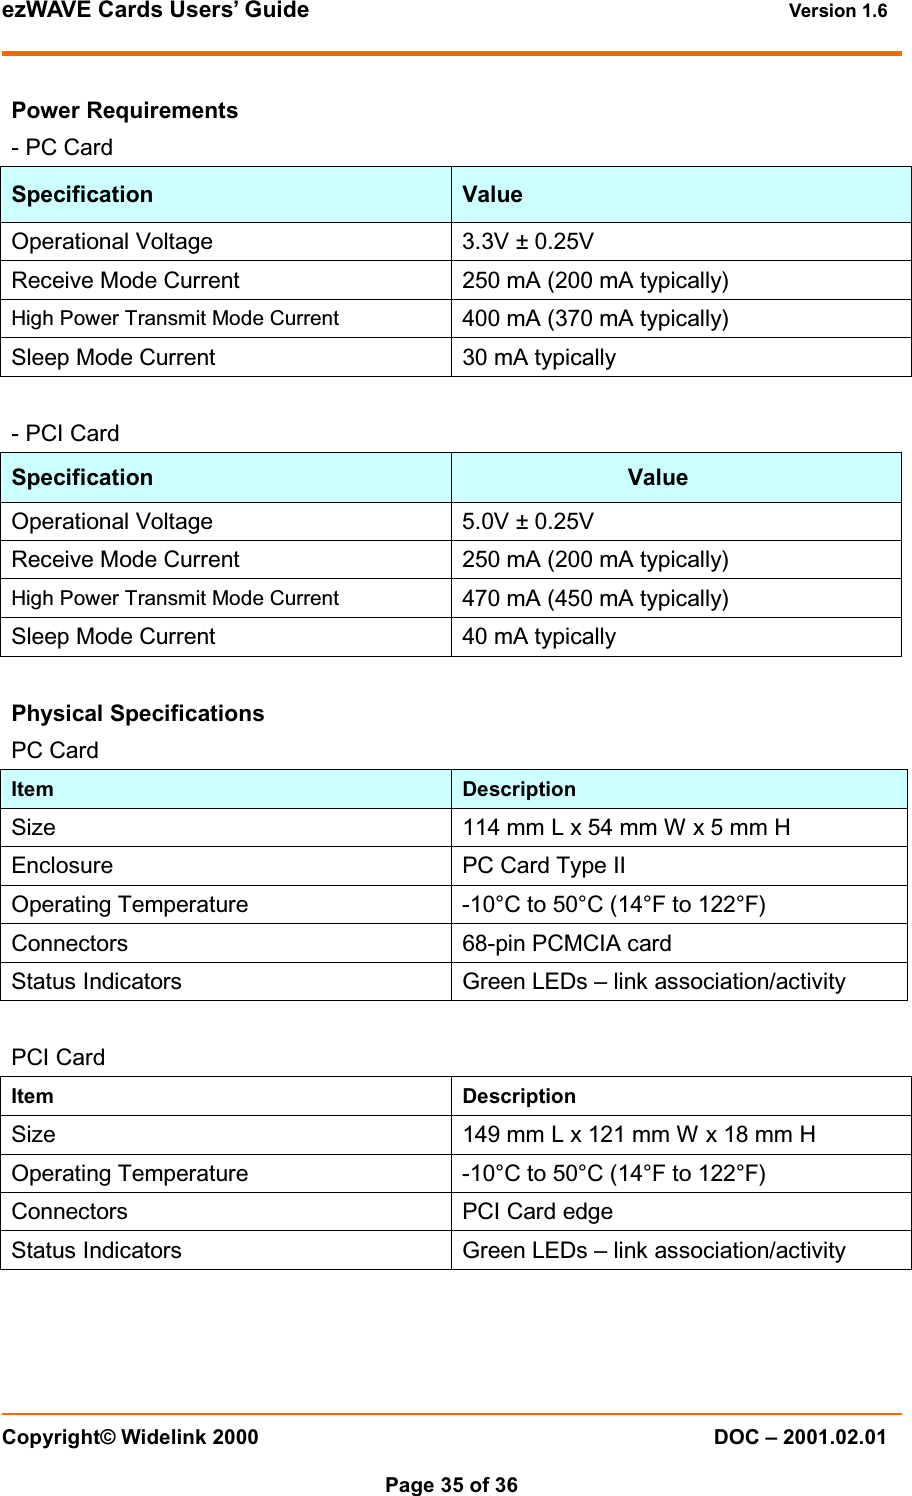 ezWAVE Cards Users’ Guide Version 1.6 Copyright© Widelink 2000 DOC – 2001.02.01Page 35 of 36 Power Requirements-PCCardSpecification ValueOperational Voltage 3.3V ± 0.25VReceive Mode Current 250 mA (200 mA typically)High Power Transmit Mode Current 400 mA (370 mA typically)Sleep Mode Current 30 mA typically- PCI CardSpecification ValueOperational Voltage 5.0V ± 0.25VReceive Mode Current 250 mA (200 mA typically)High Power Transmit Mode Current 470 mA (450 mA typically)Sleep Mode Current 40 mA typicallyPhysical SpecificationsPC CardItem DescriptionSize 114 mm L x 54 mm W x 5 mm HEnclosure PC Card Type IIOperating Temperature -10°C to 50°C (14°F to 122°F)Connectors 68-pin PCMCIA cardStatus Indicators Green LEDs – link association/activityPCI CardItem DescriptionSize 149 mm L x 121 mm W x 18 mm HOperating Temperature -10°C to 50°C (14°F to 122°F)Connectors PCI Card edgeStatus Indicators Green LEDs – link association/activity